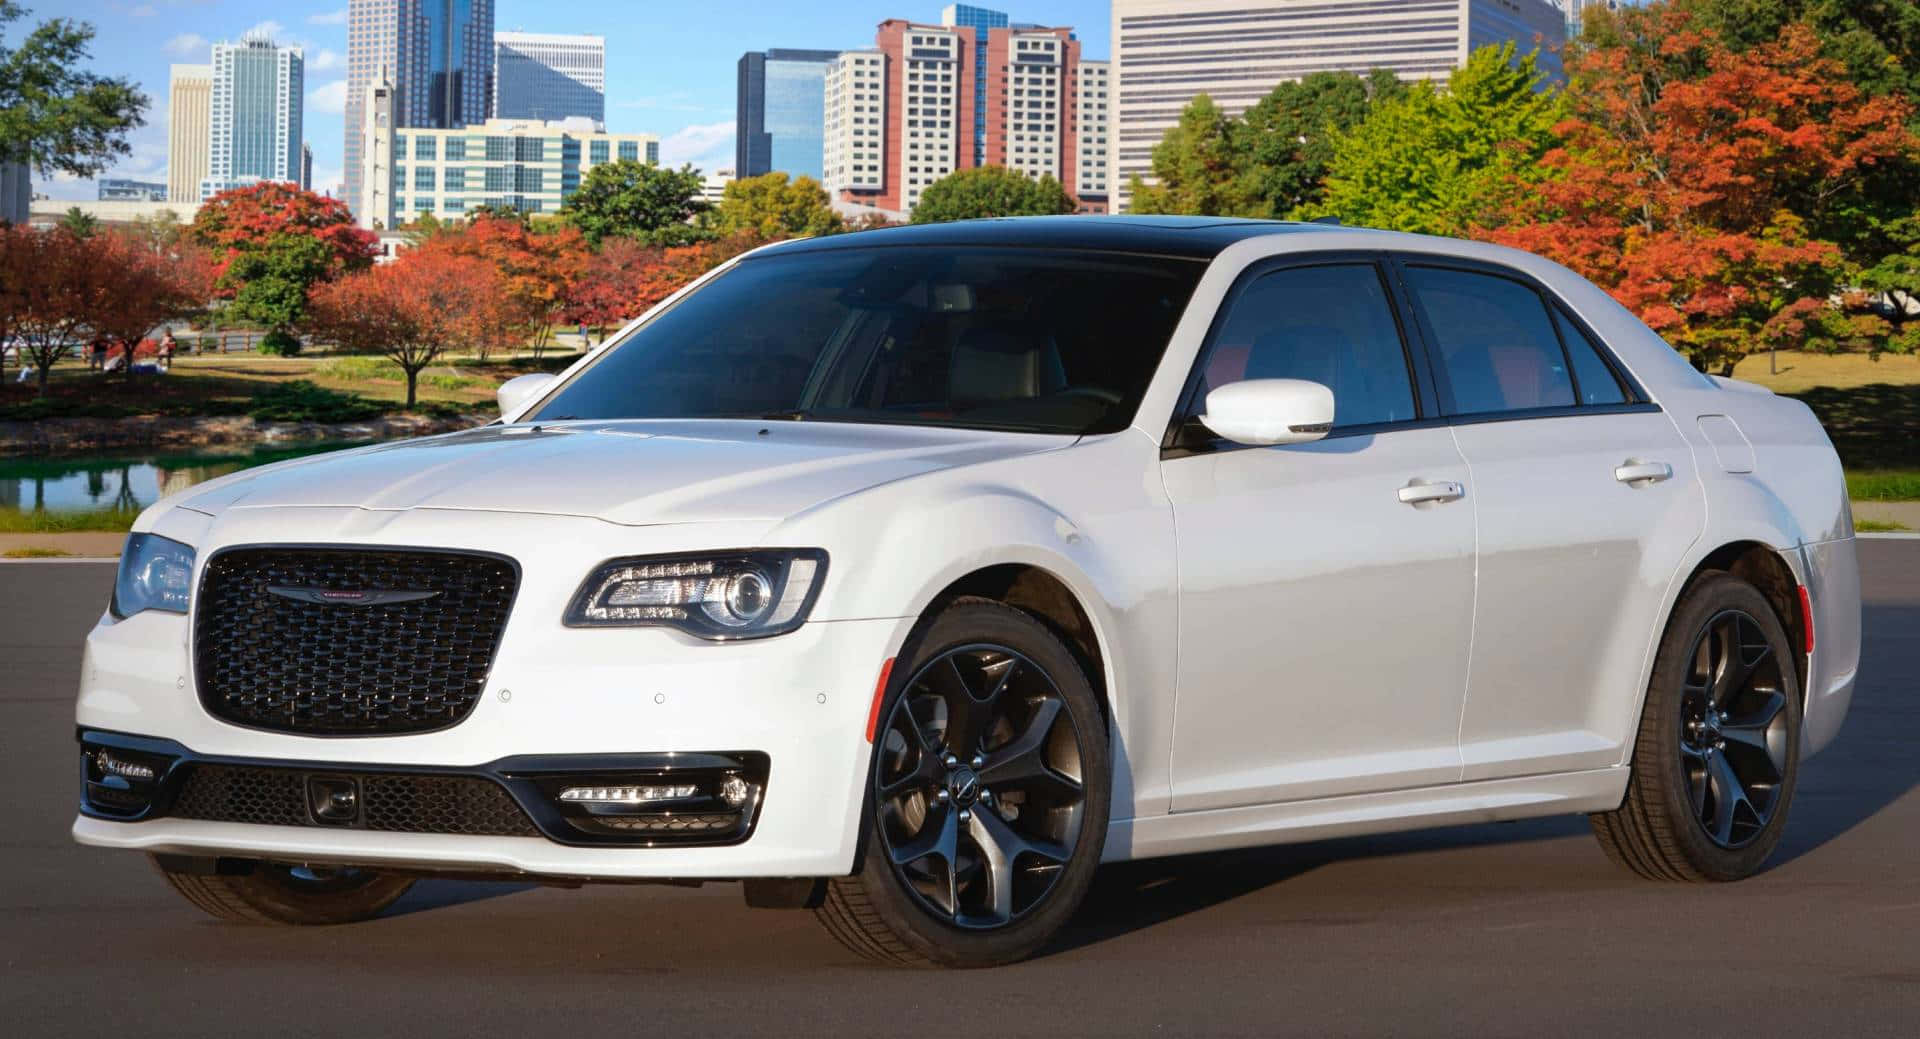 Captivating Chrysler 300 - Luxury&Style in Every Curve Wallpaper